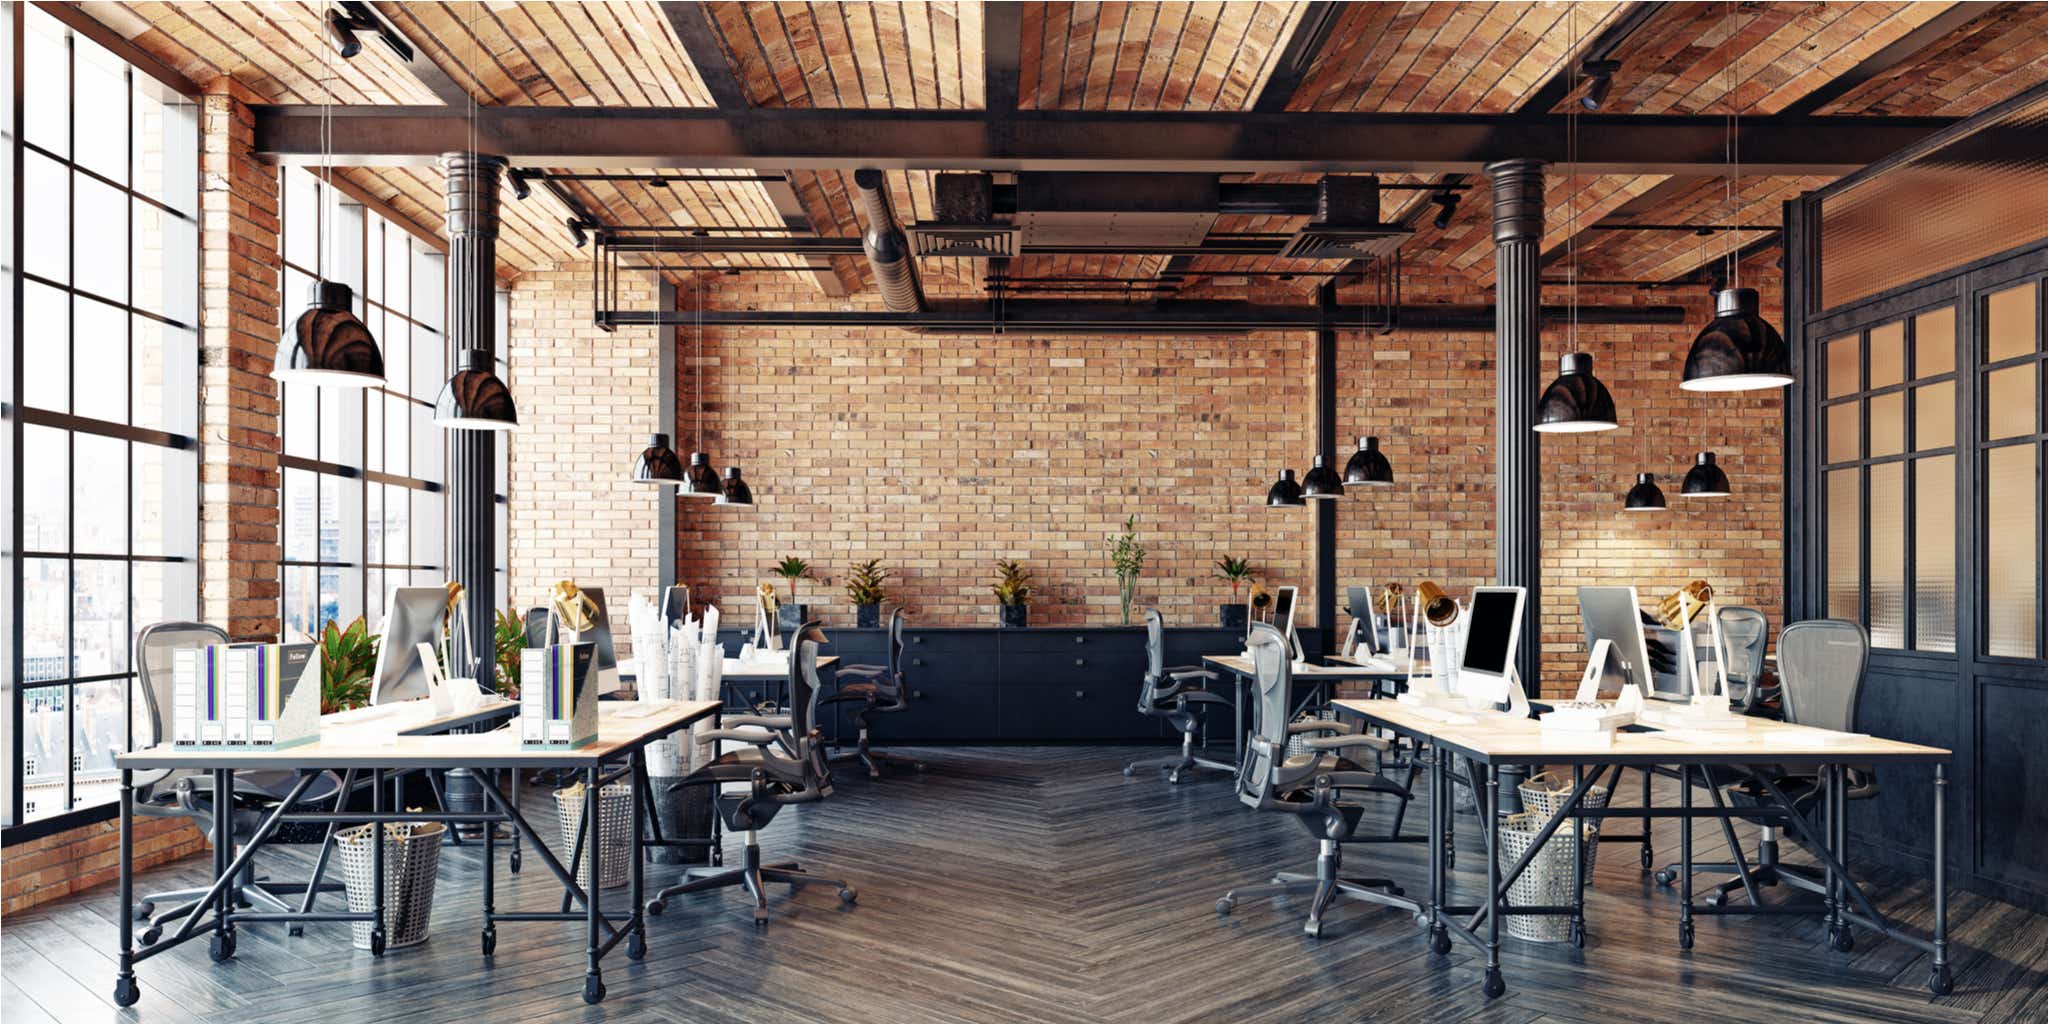 workspace with exposed brick walls, steel beams and arch ceilings